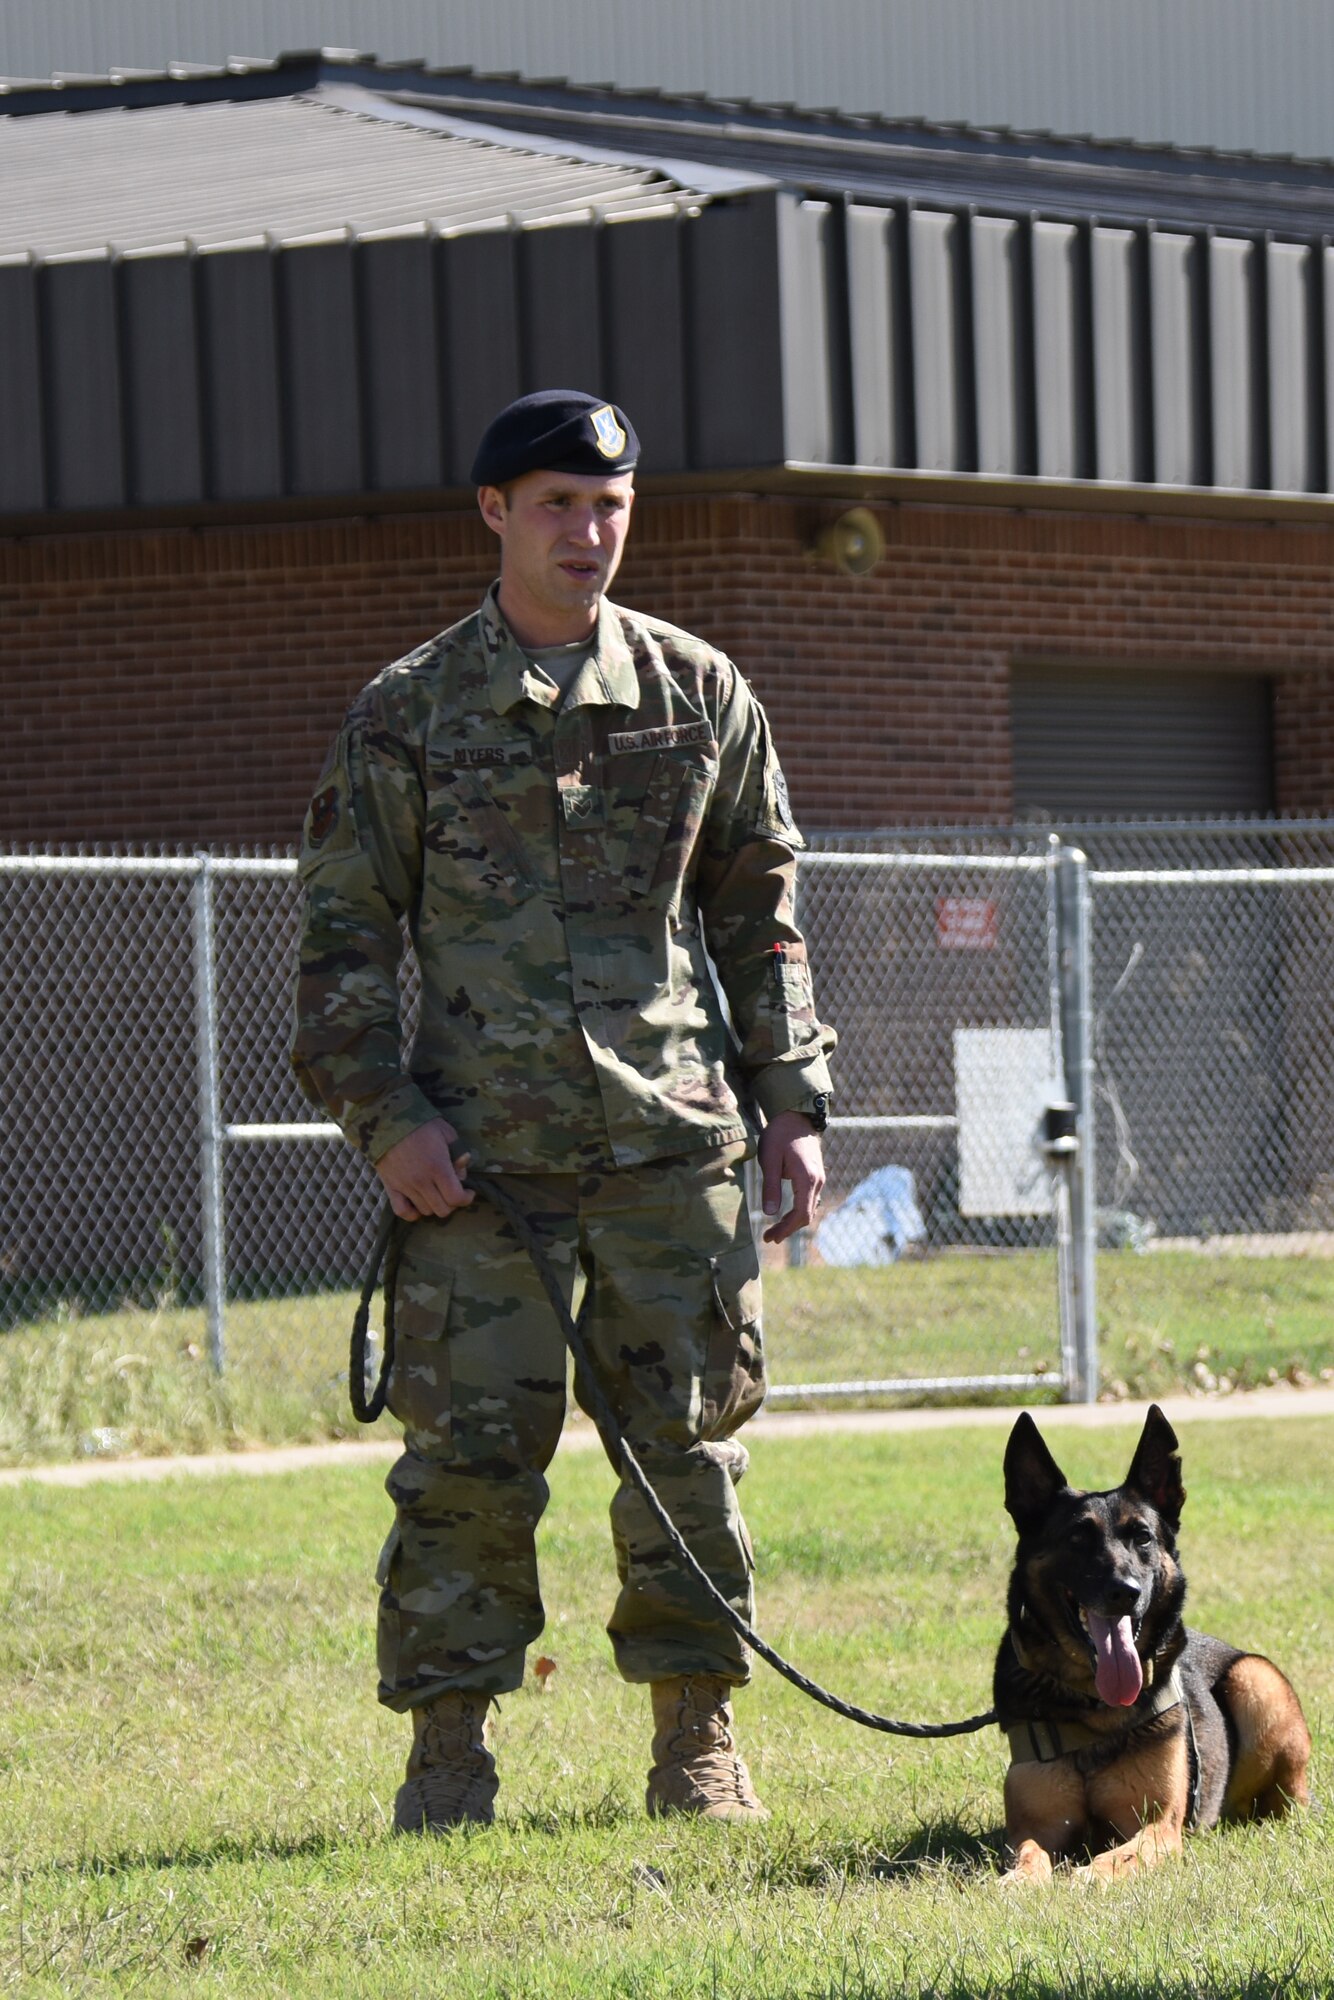 U.S. Air Force Senior Airman Shane Myers, 17th Security Forces Squadron military working dog handler, shows off his partner Hugo, 17th SFS K-9, during the Operation KIDS event on Goodfellow Air Force Base, Texas, Nov. 3, 2018. The 17th SFS trains the K-9s to detect, deny and deter would be adversaries from gaining access to base, they are also trained to detect explosives. (U.S. Air Force Photo by Senior Airman Seraiah Hines/Released)